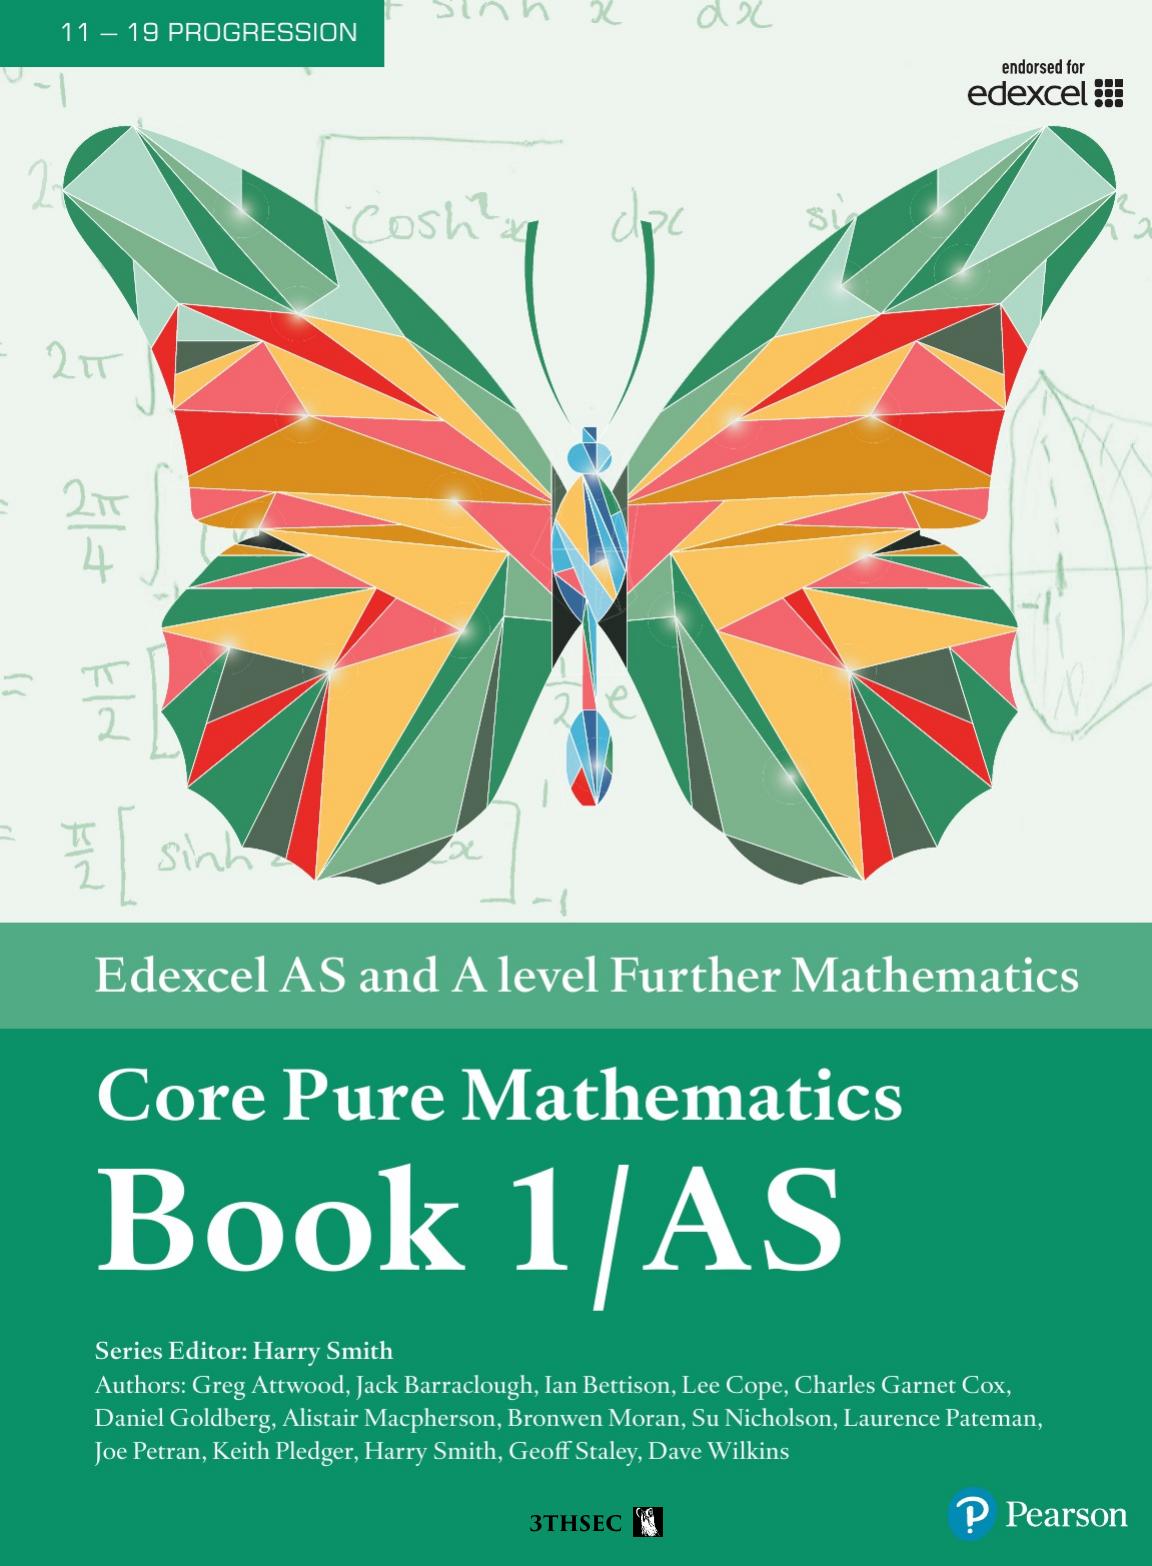 Edexcel AS and A level Further Mathematics Core Pure Mathematics Book 1AS by Various Authors